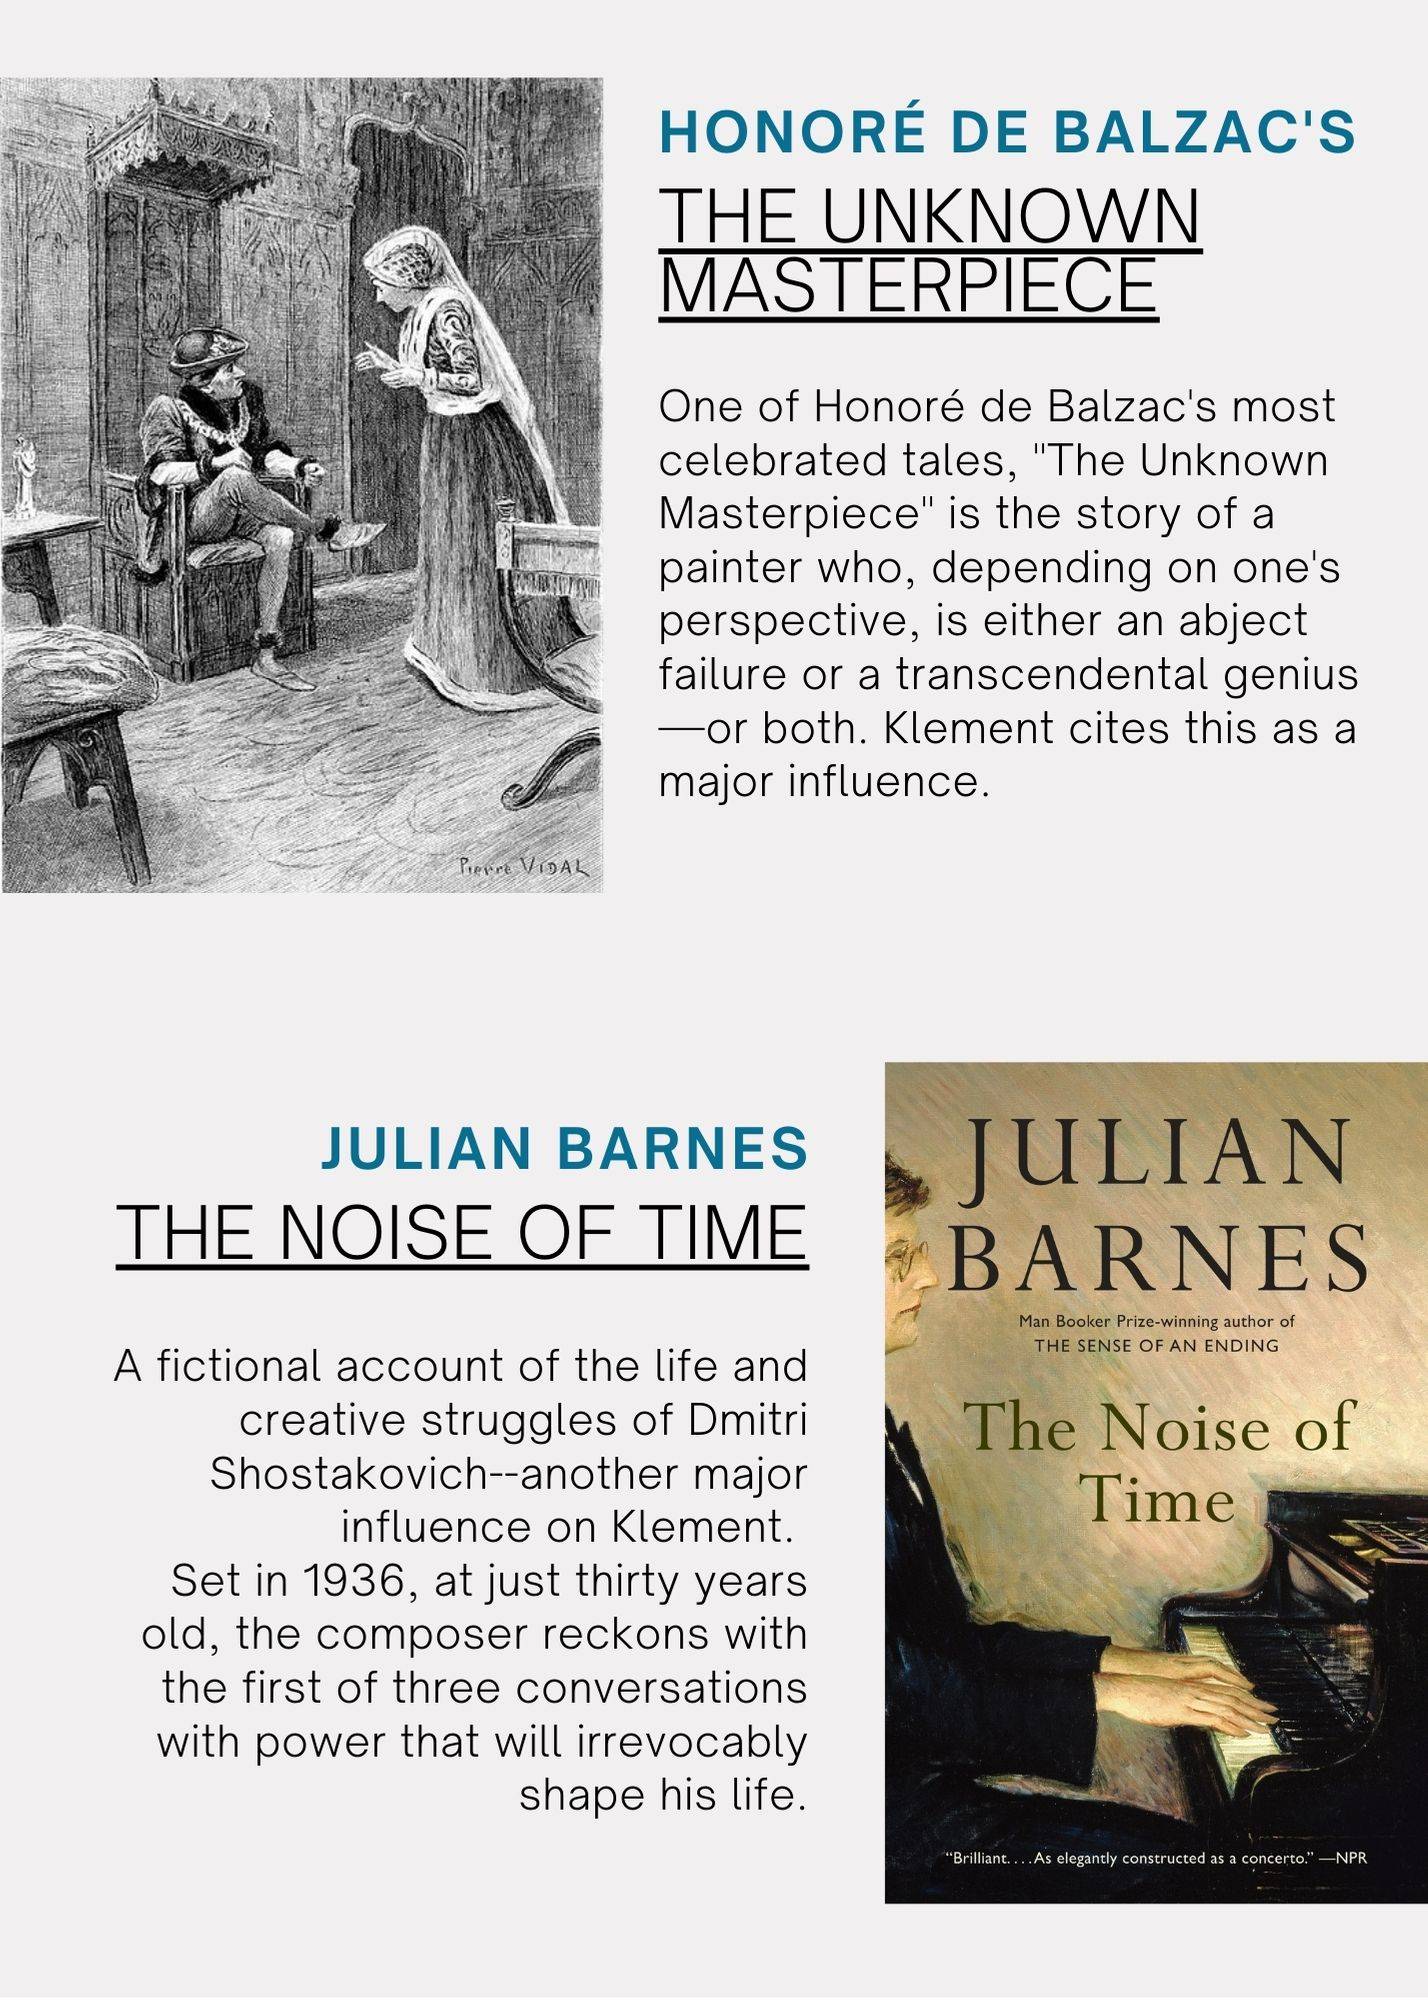 Two book covers with descriptions, Honore de Balzac's The Unknown Masterpiece, and Julian Barnes' The Noise of Time